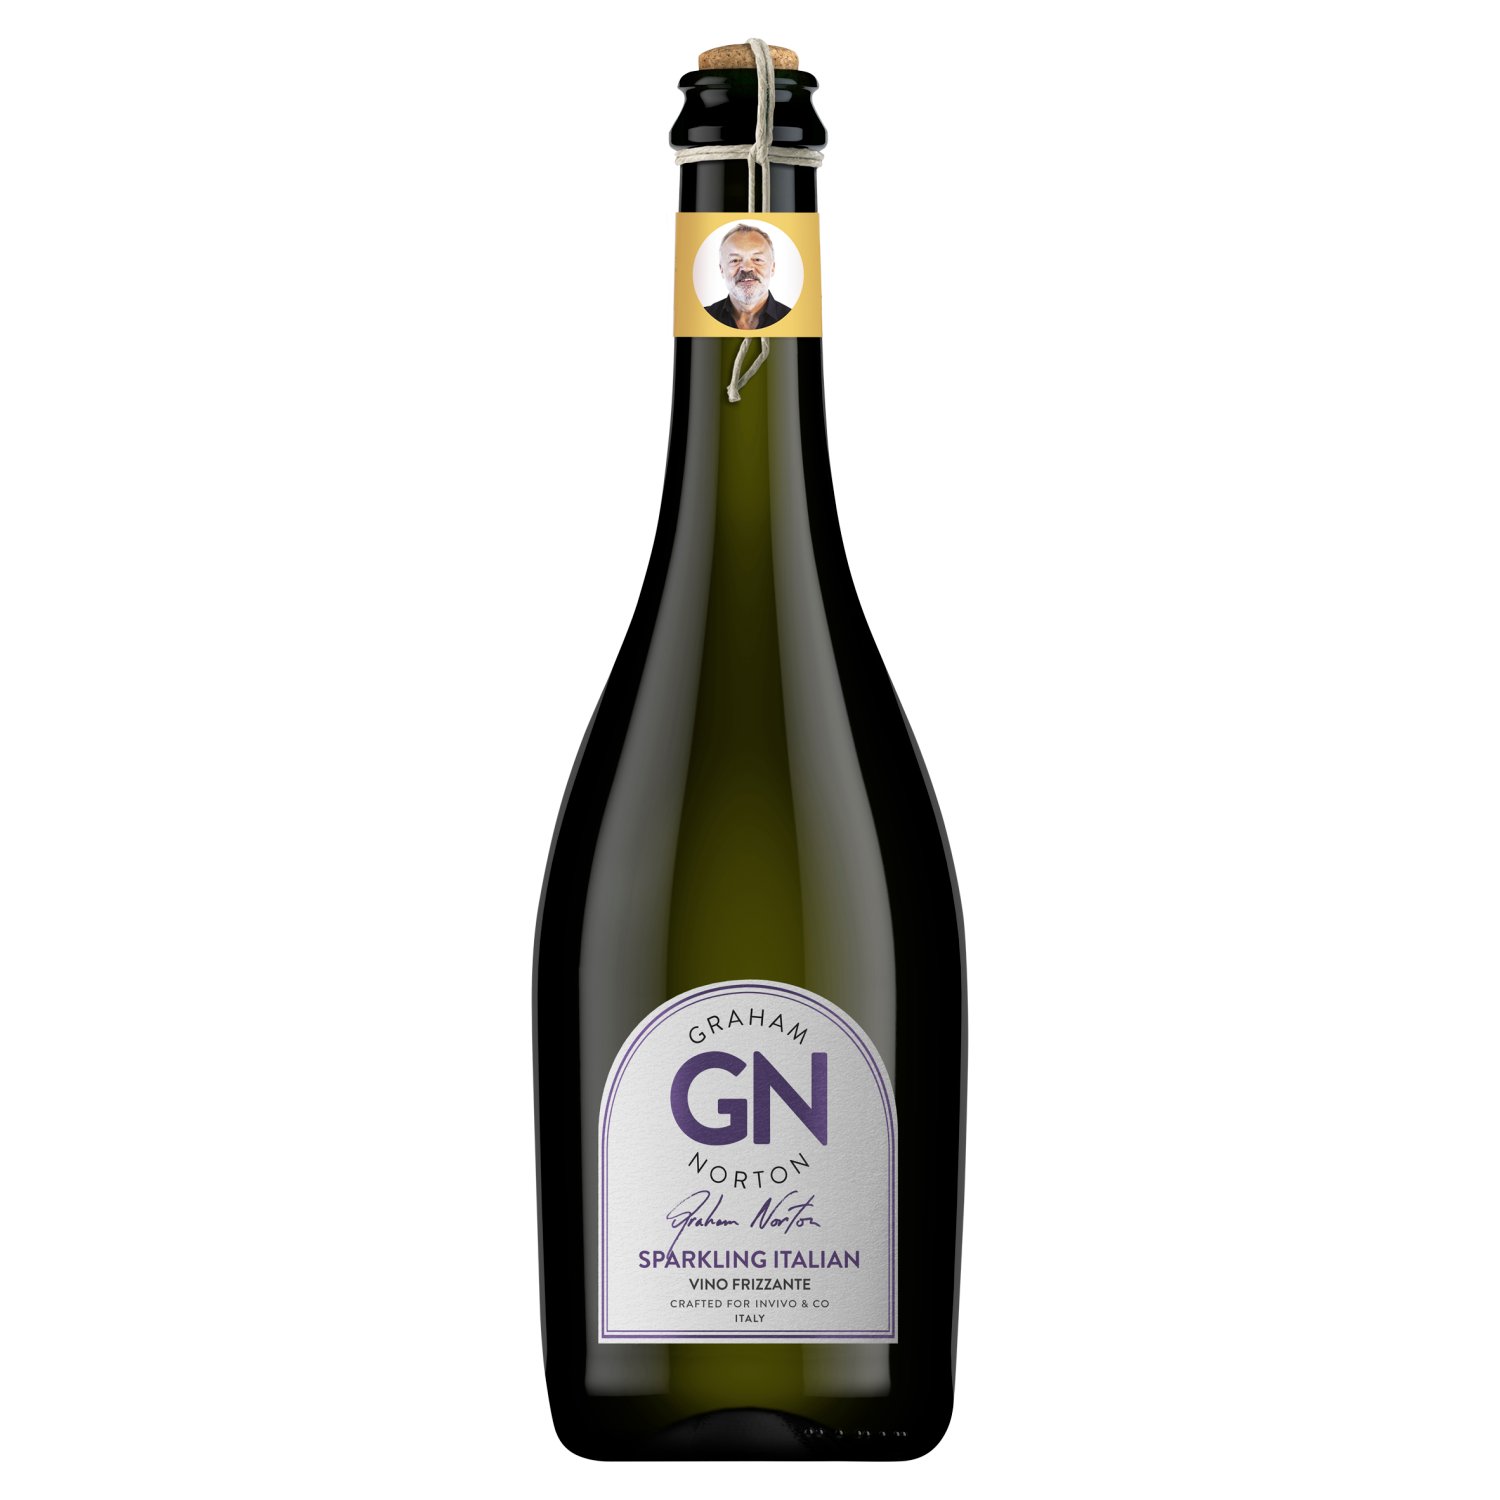 Introducing the most sparkling Italian you'll ever share an evening with! Graham's Prosecco DOC Frizzante is made to his own specification with Glera grapes from the home of Prosecco DOC, so it's sure to be a welcome addition to your next picnic, party or pizza by the tele. Salute!